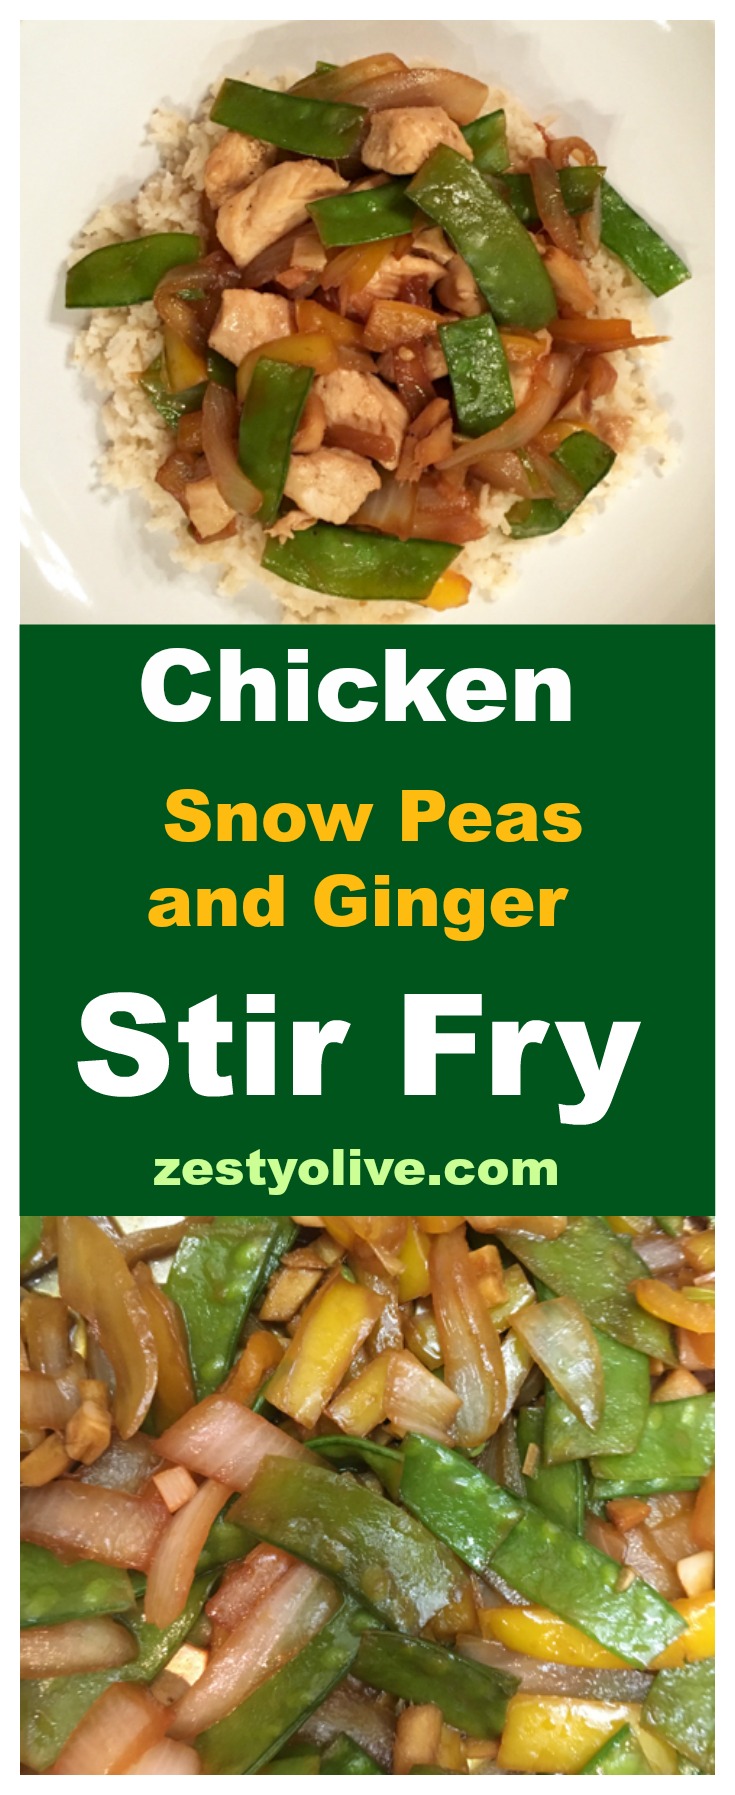 I love snow peas. I love ginger. Combine them with chicken, and you've got a delicious meal just waiting to be created: Chicken, Snow Peas and Ginger Stir Fry. I combined these, stir-fry and served over brown rice. If you happen to have leftovers, just warm them up the next day and enjoy again.